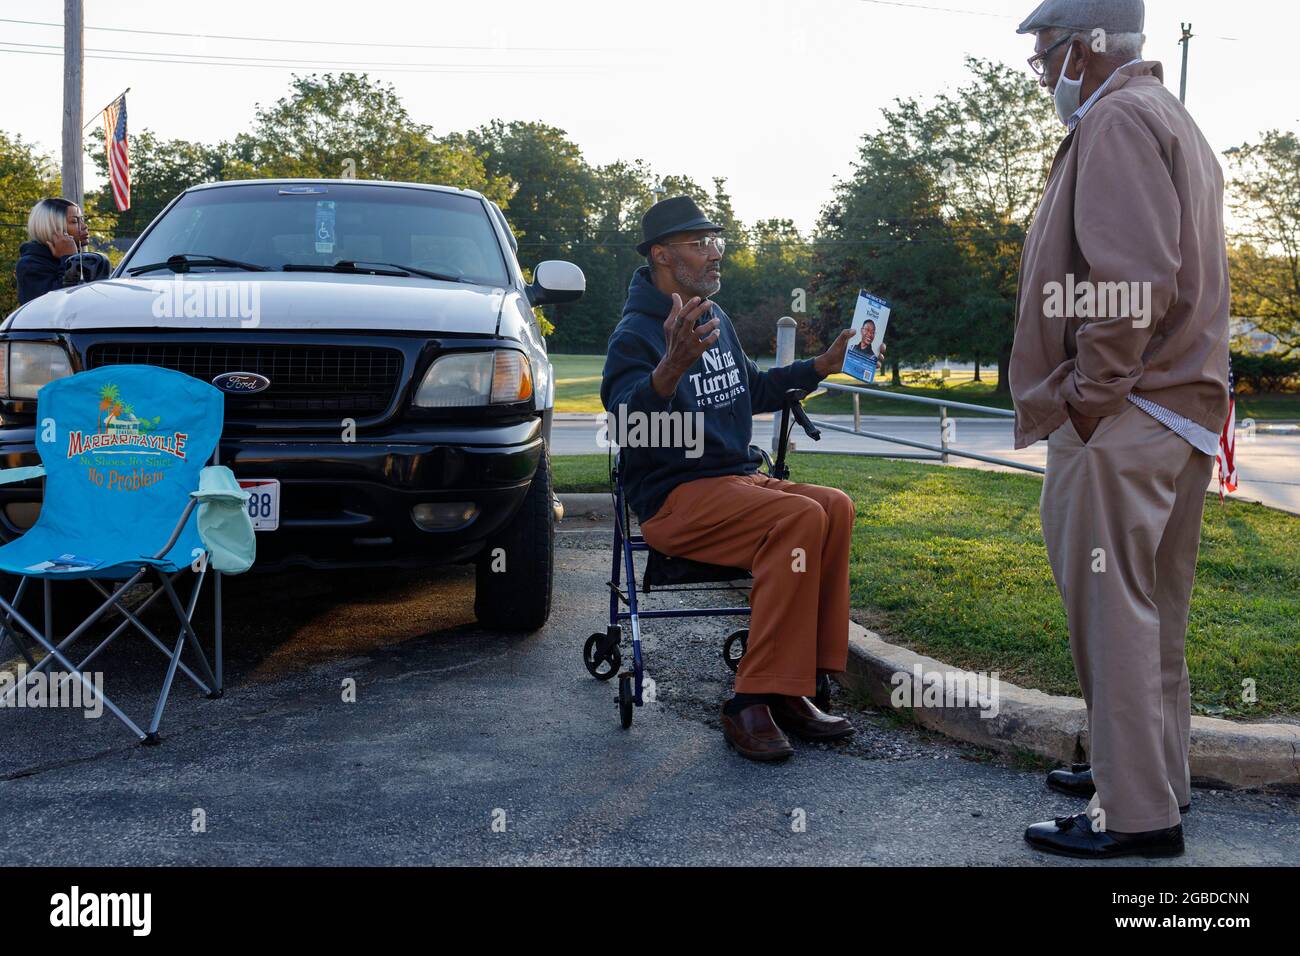 Erwin Johnson, 61, of Cleveland, Ohio talks to a voter outside of the polling place at Warrensville Heights Recreation Center. Johnson came to show support for Nina Turner because, “I think she's the best candidate. She's been a state rep, She's the most qualified.” Voters came out to the polls for a special election in Ohio's 11th district. The two main leading candidates for this House of Representatives seat are two Democrats, Nina Turner, a progressive candidate, and Shontel Brown, who represents the traditional Democratic establishment. (Photo by Stephen Zenner/SOPA Images/Sipa USA) Stock Photo